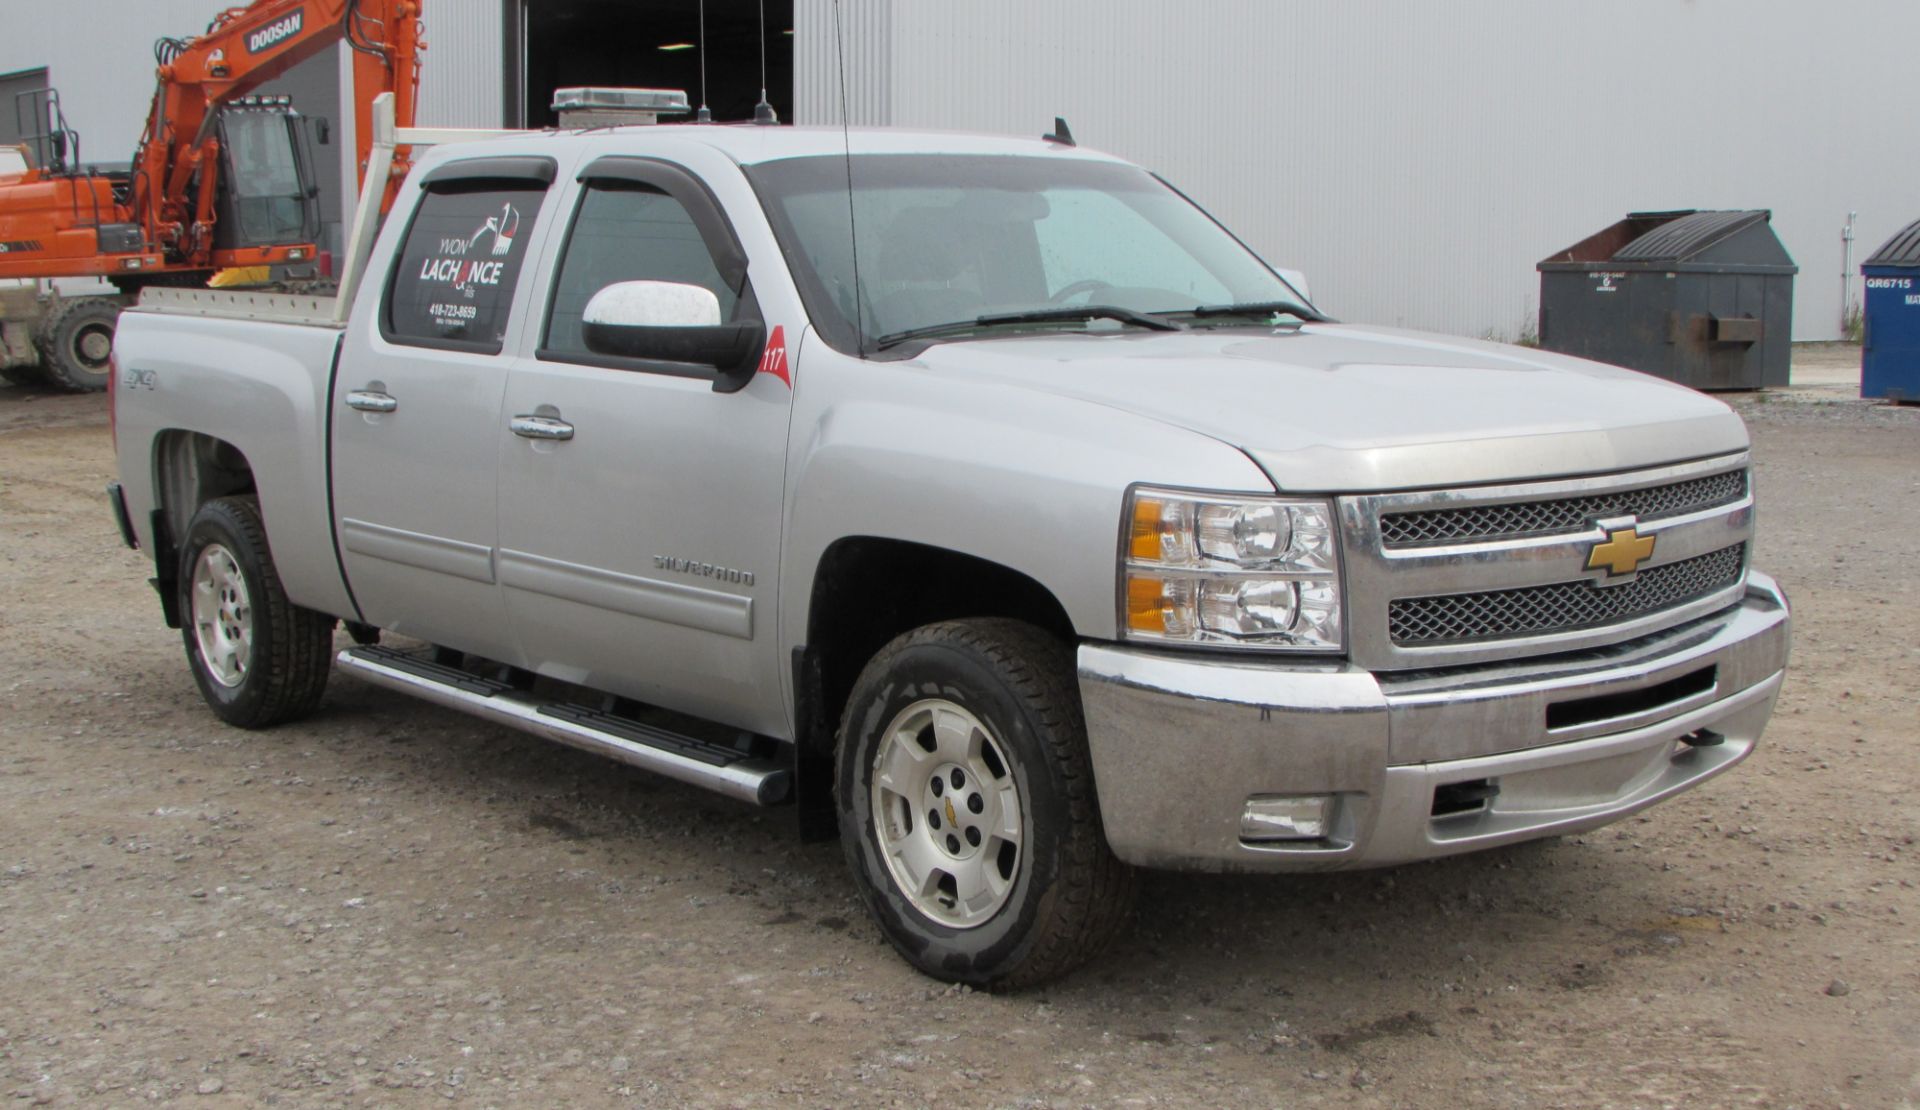 2012 CHEVY SILVERADO 1500 LT PICK UP C/W CREW CAB, 4X4, BOX LINER, RUNNING BOARDS, APPROX. 54,